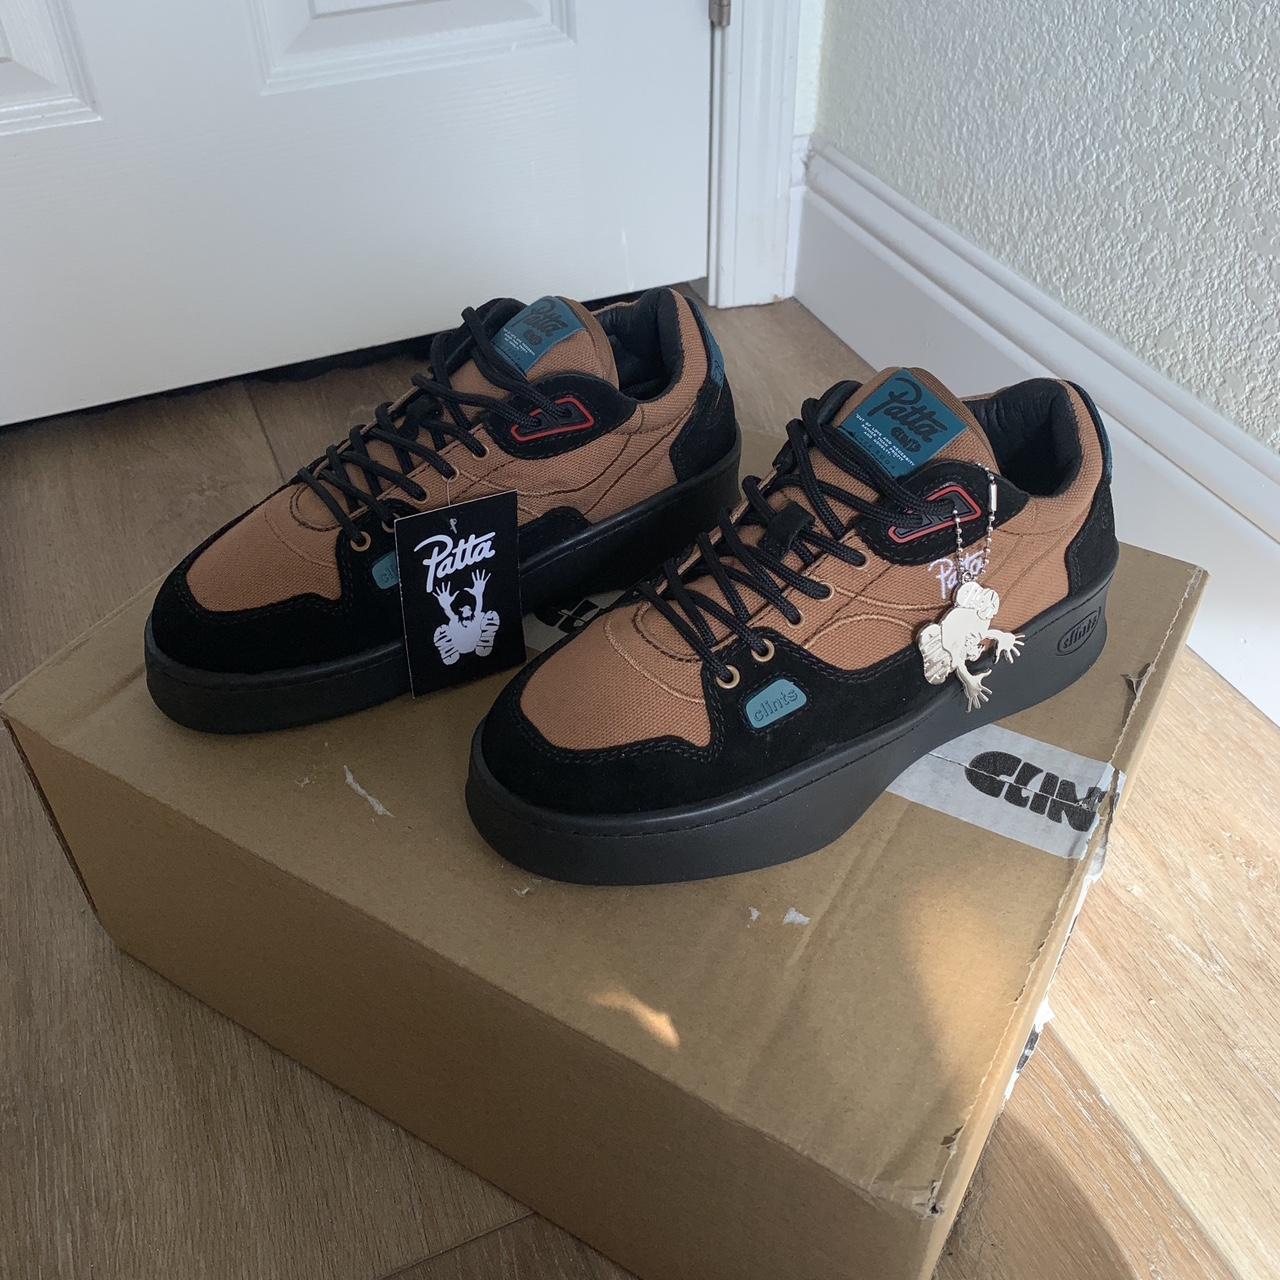 patta x clints stepper in limited edition colorway.... - Depop